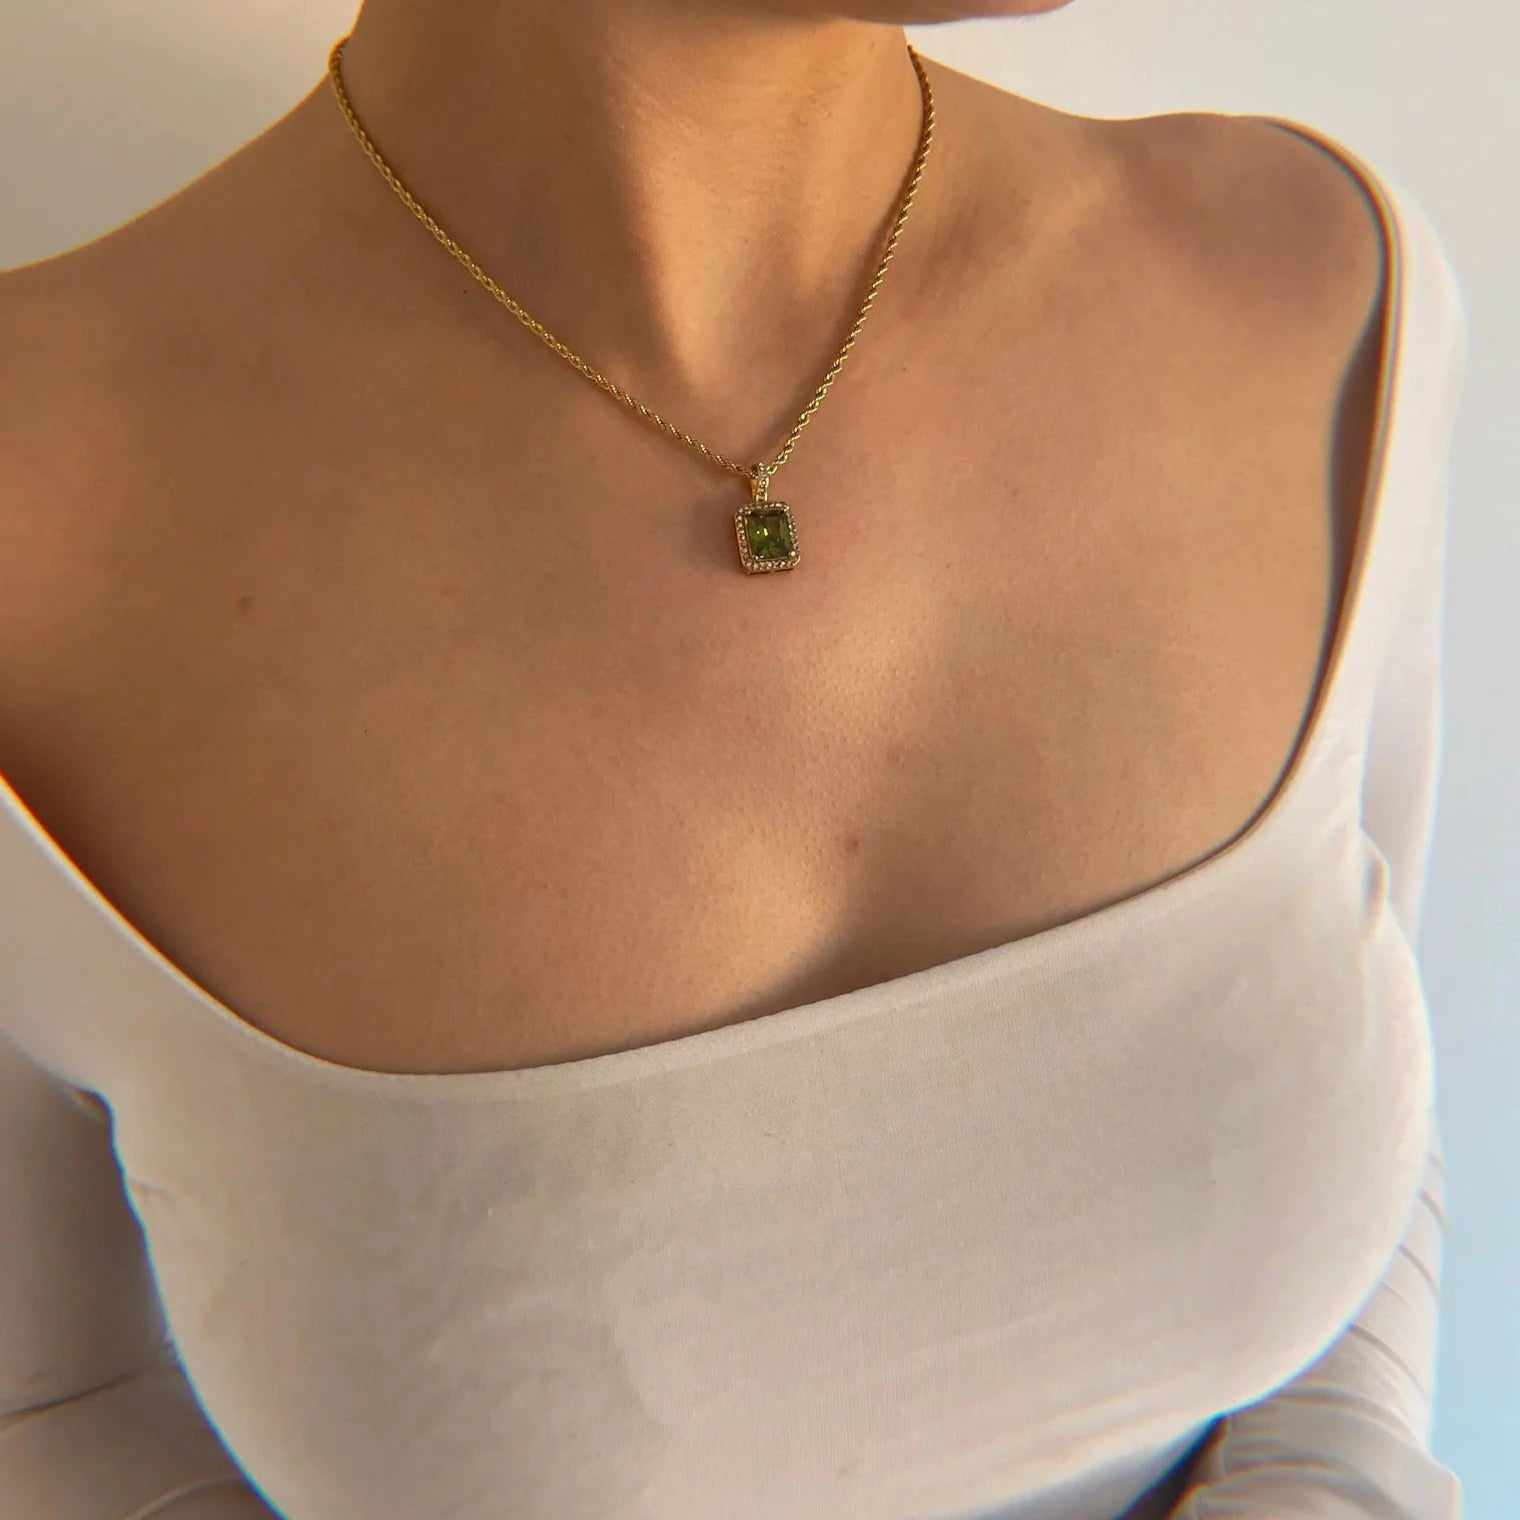 Green Pendant Necklace - Cosmic Chains 